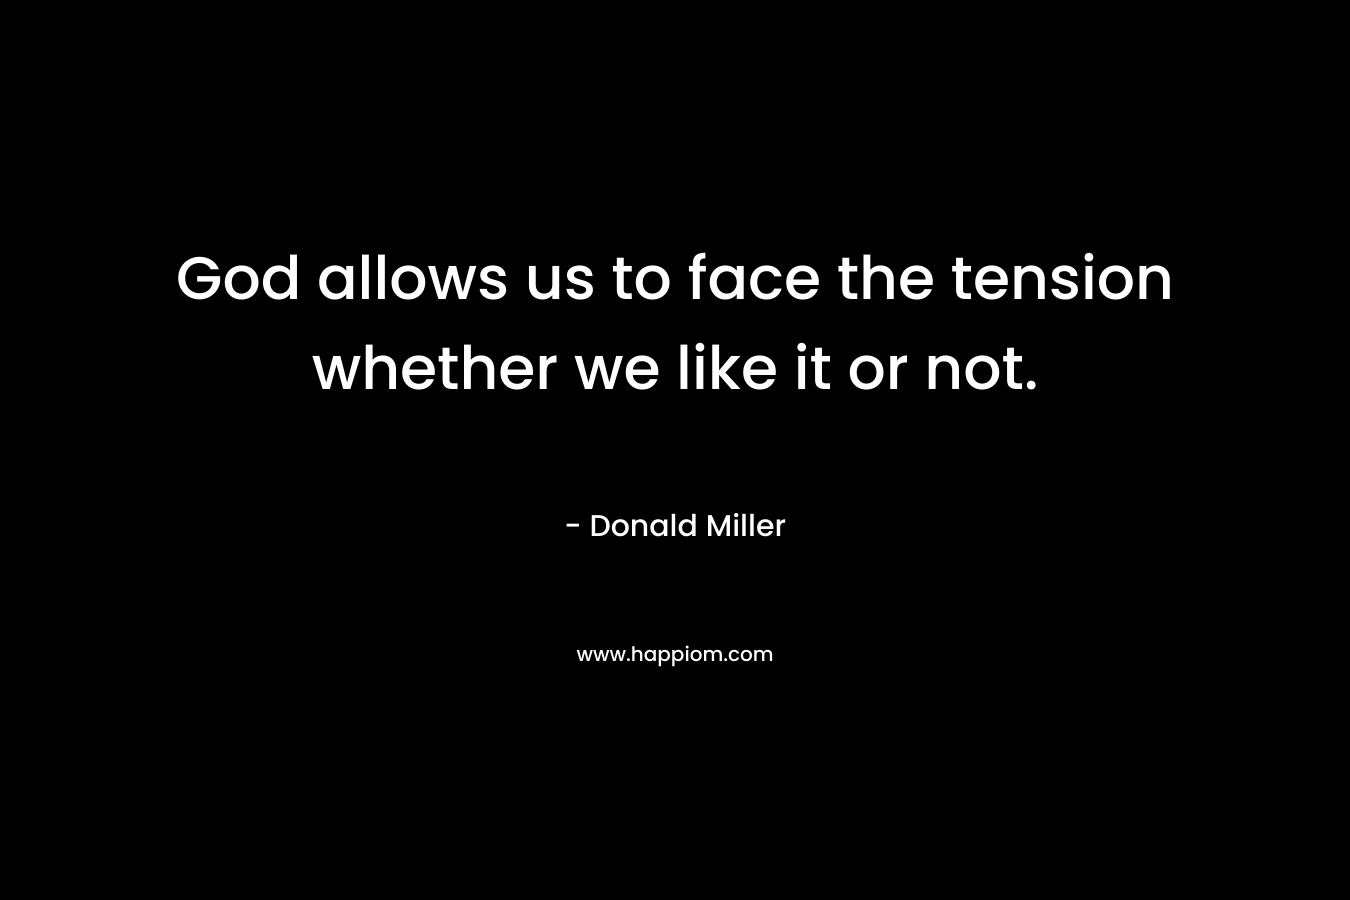 God allows us to face the tension whether we like it or not.